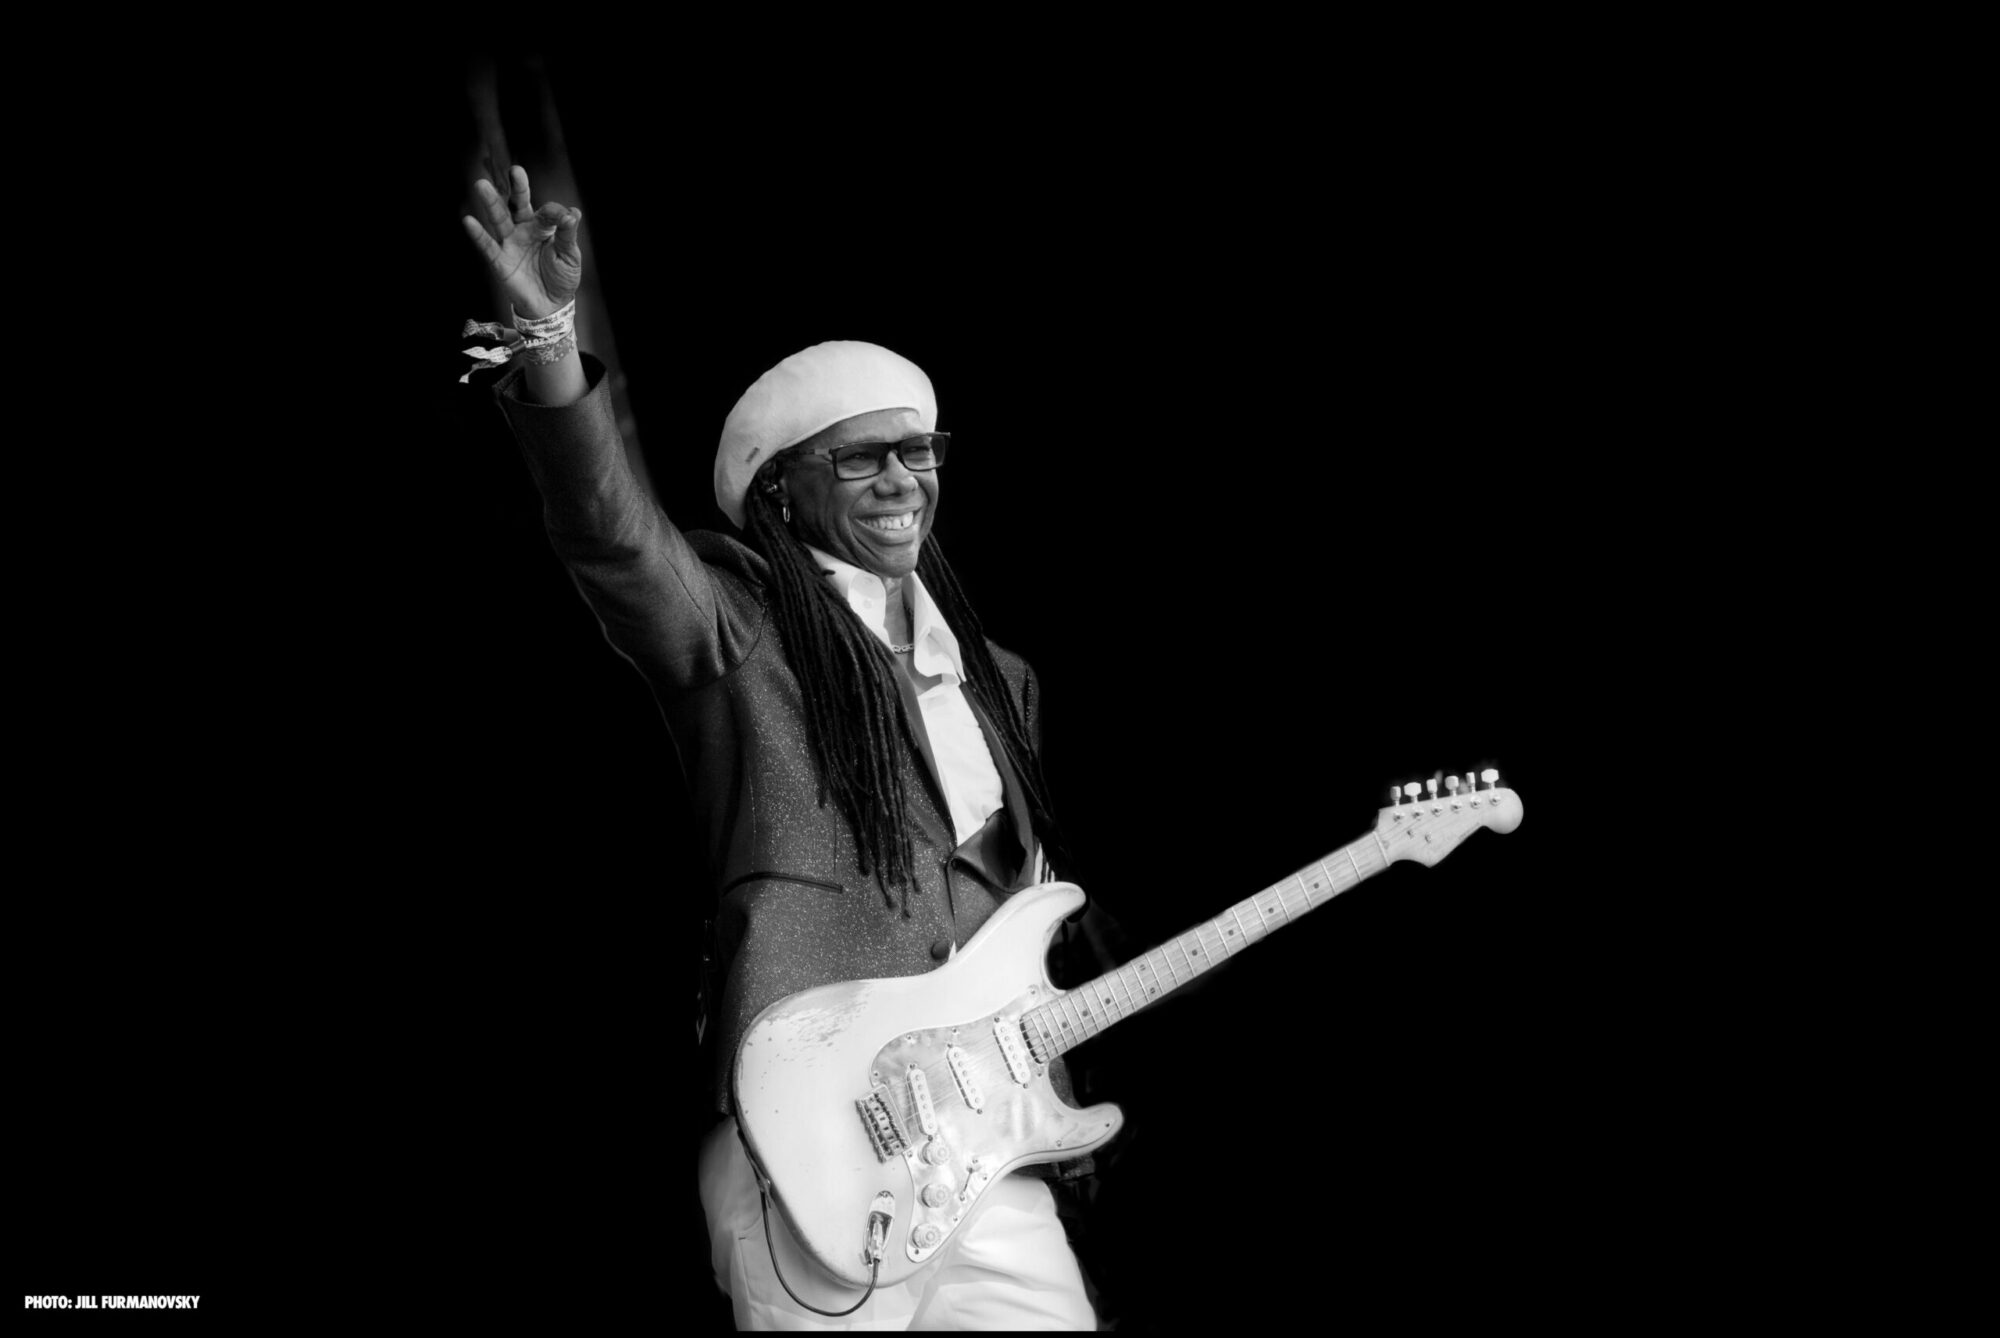 Image name Nile Rodgers and CHIC Official Ticket and Hotel Packages at Dalby Forest Yorkshire scaled the 21 image from the post Nile Rodgers and CHIC - Official Ticket and Hotel Packages at The Piece Hall, Halifax in Yorkshire.com.